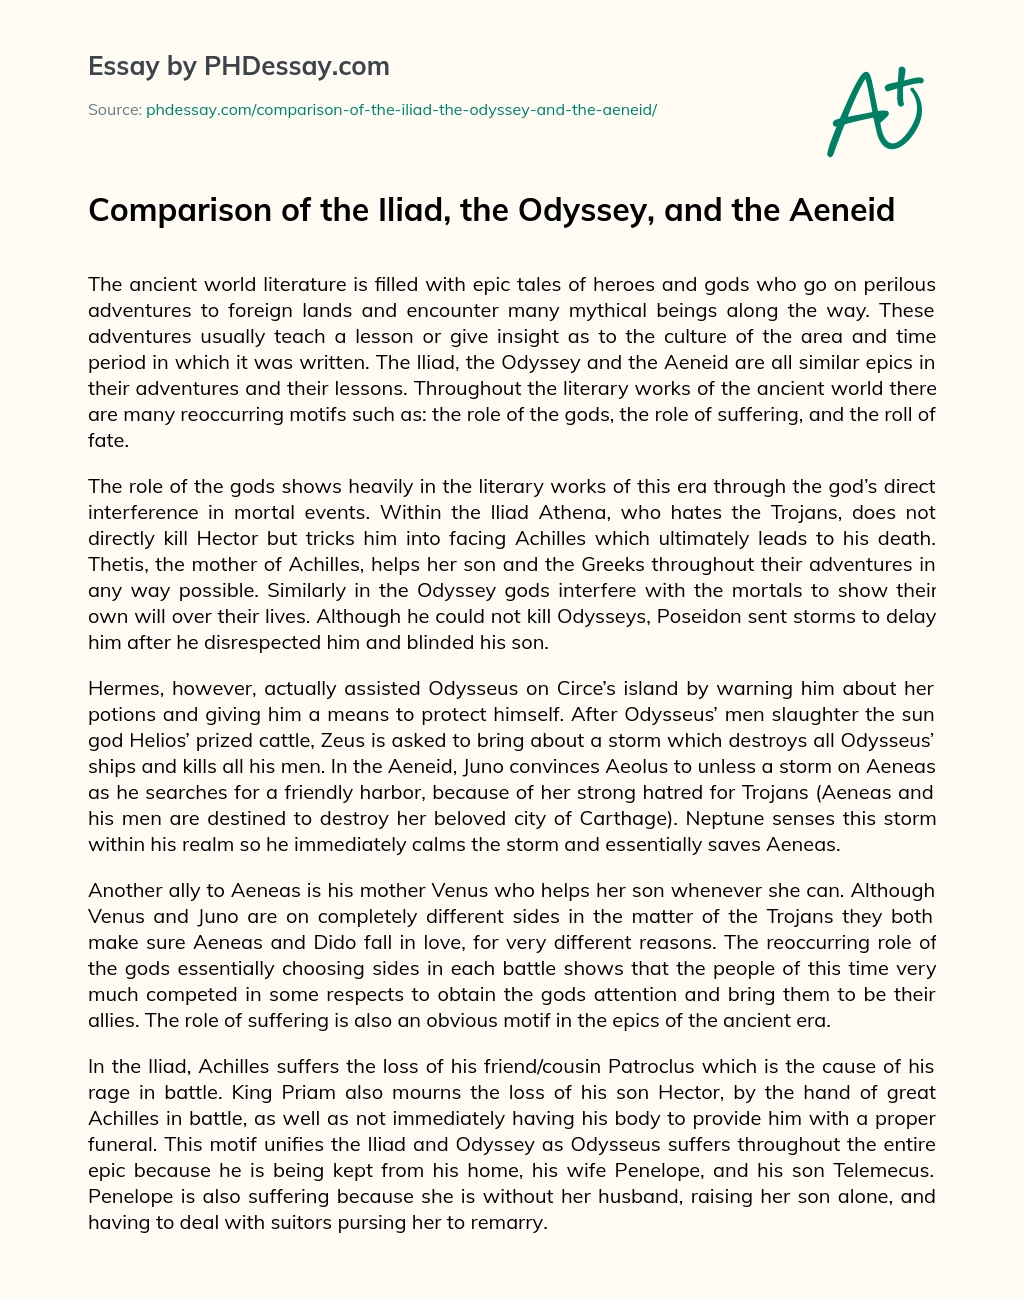 Comparison of the Iliad, the Odyssey, and the Aeneid essay